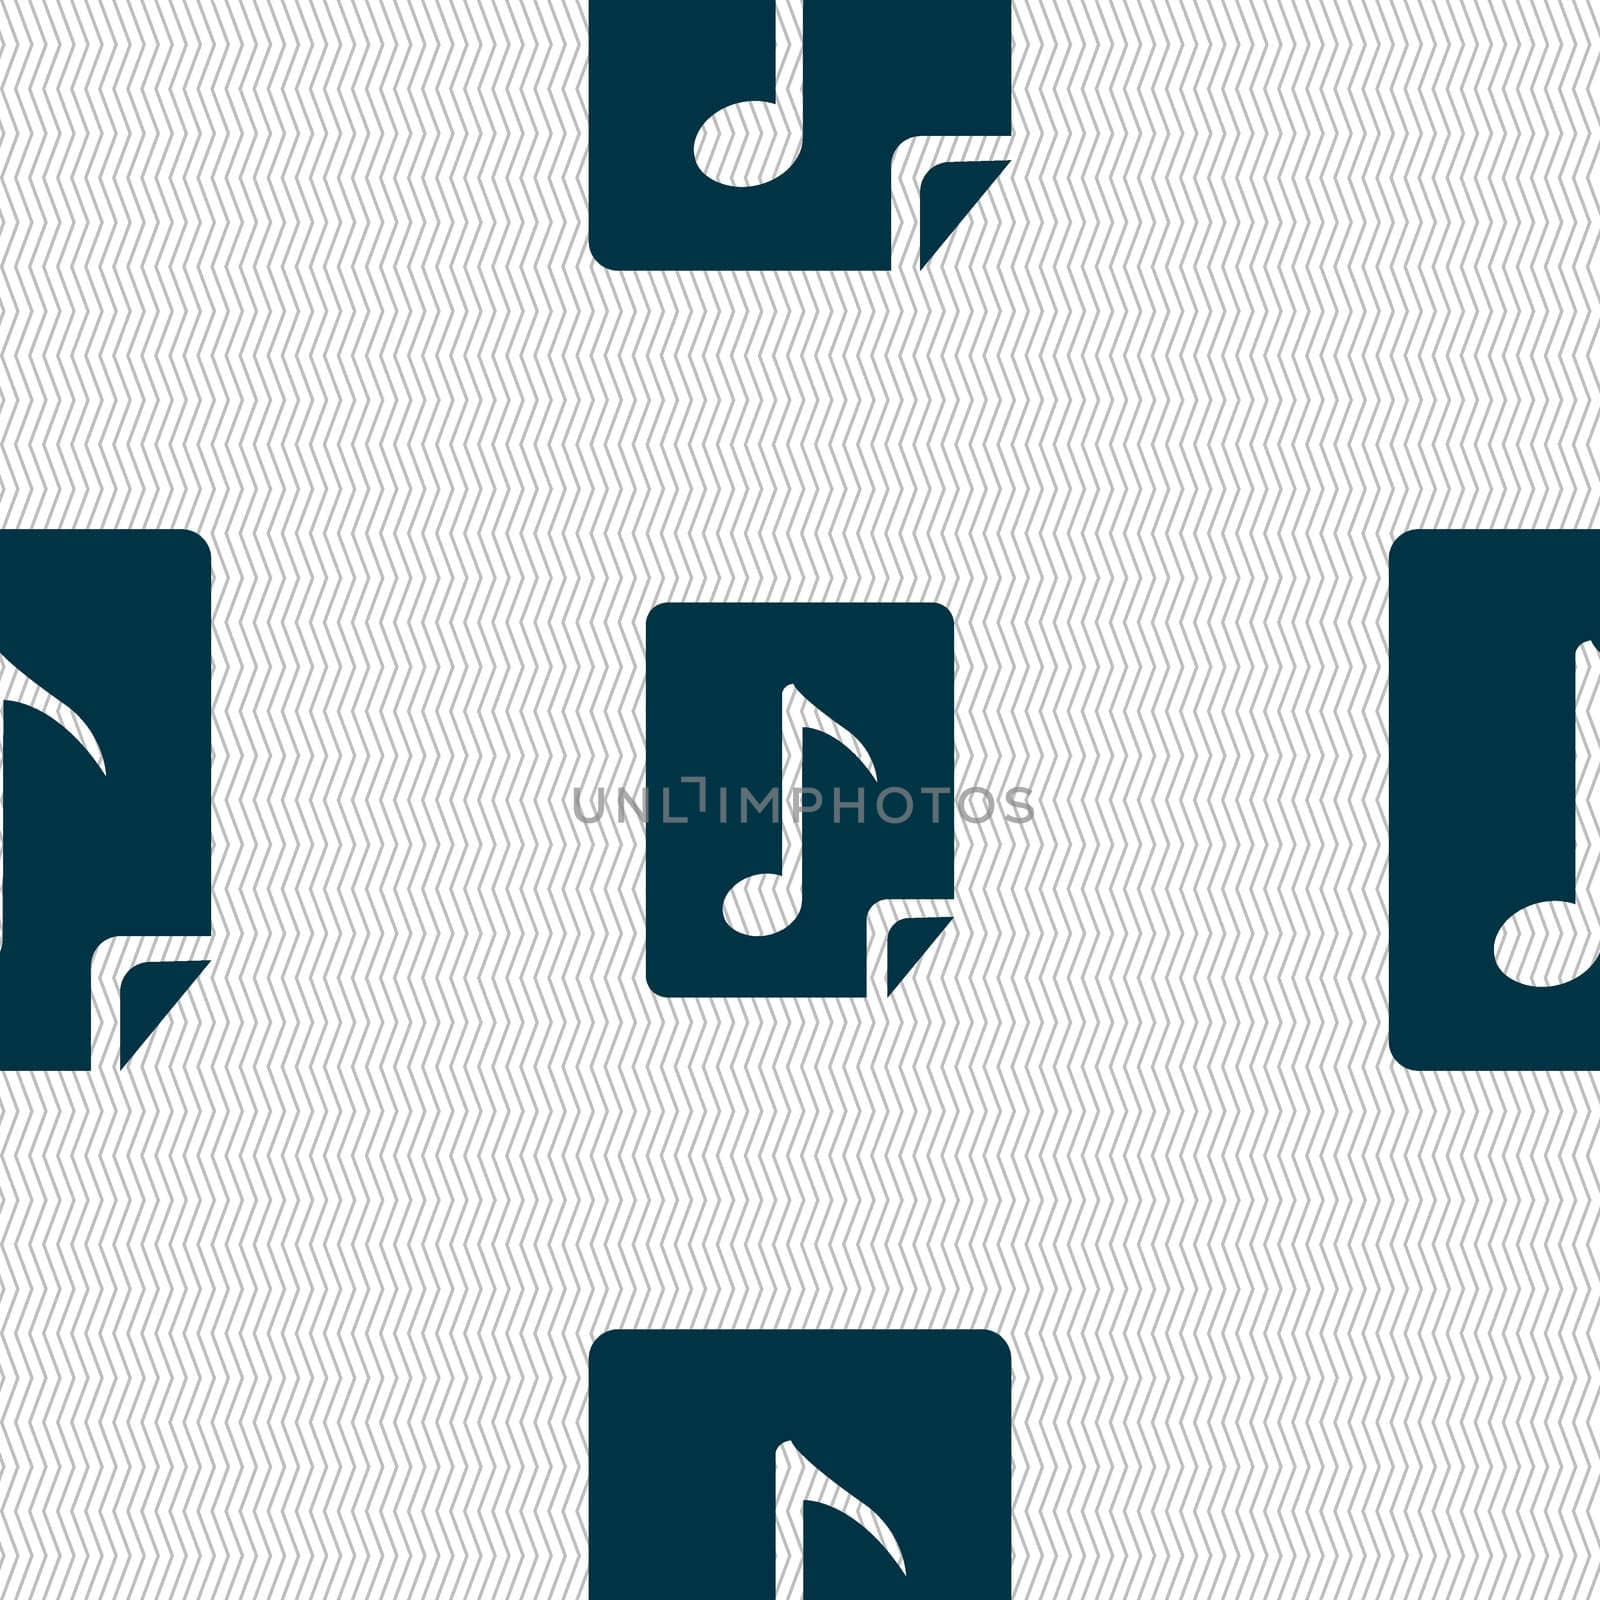 Audio, MP3 file icon sign. Seamless abstract background with geometric shapes. illustration